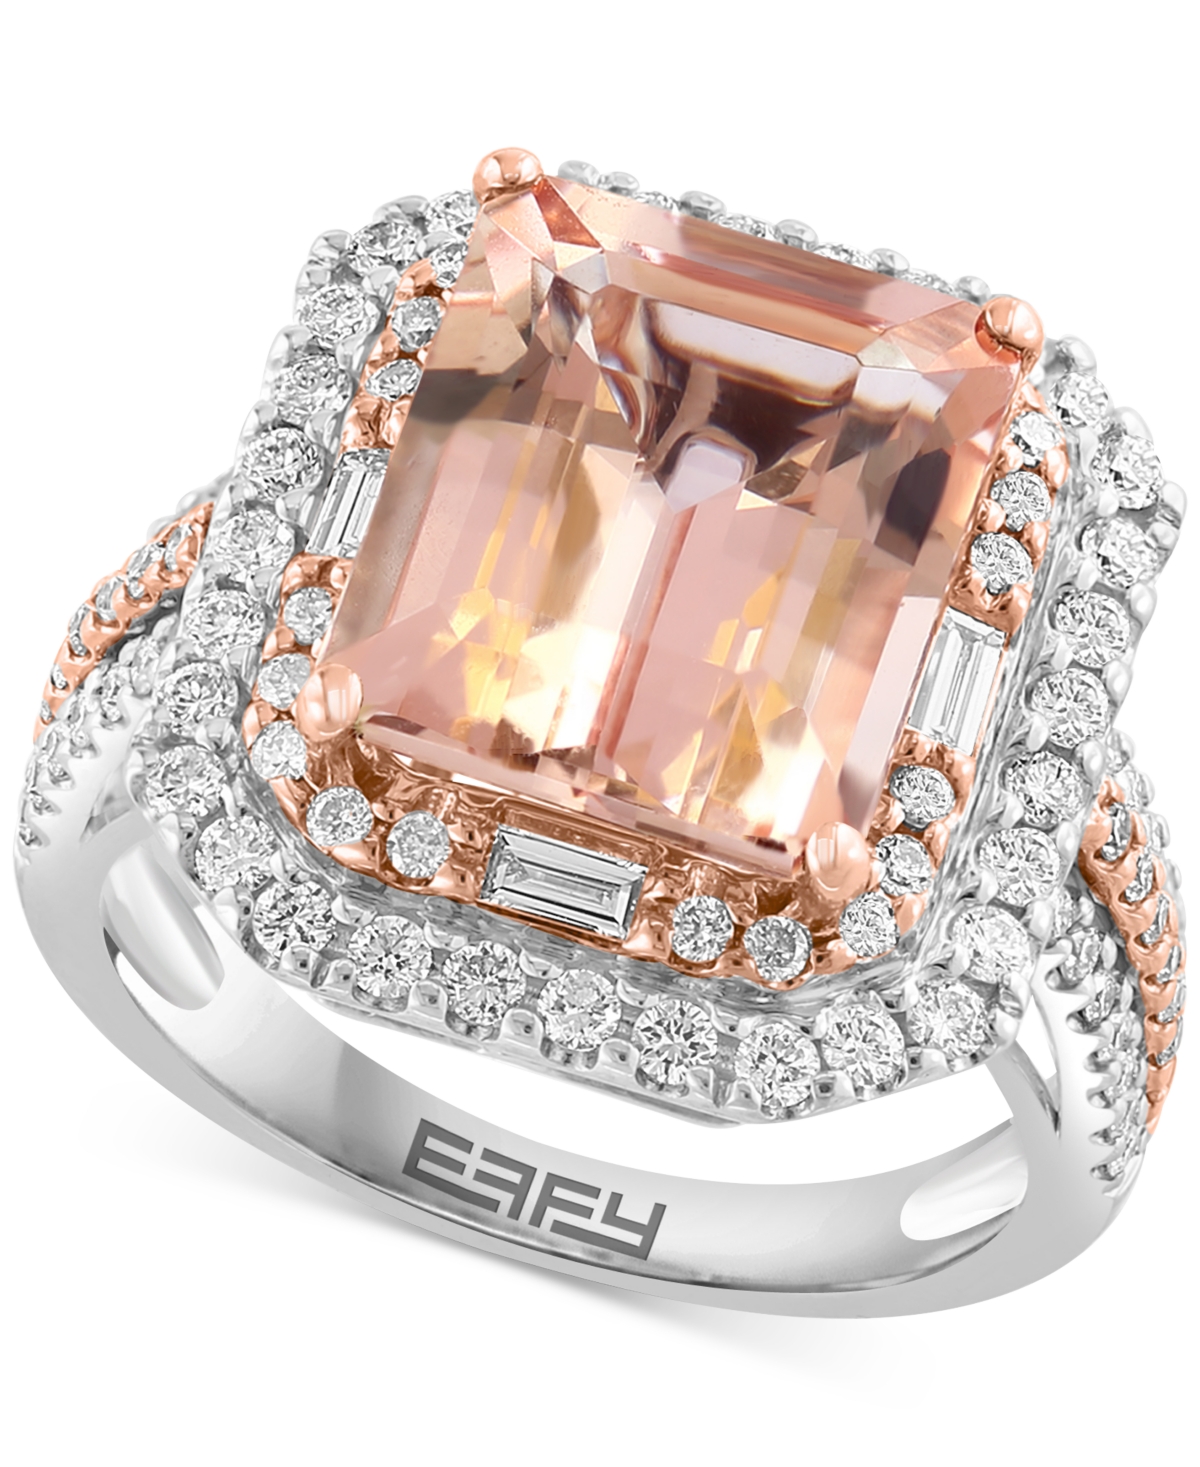 Effy Collection Effy Limited Edition Morganite (4-7/8 Ct. T.w.) & Diamond (1 Ct. T.w.) Ring In 14k White & Rose Gold